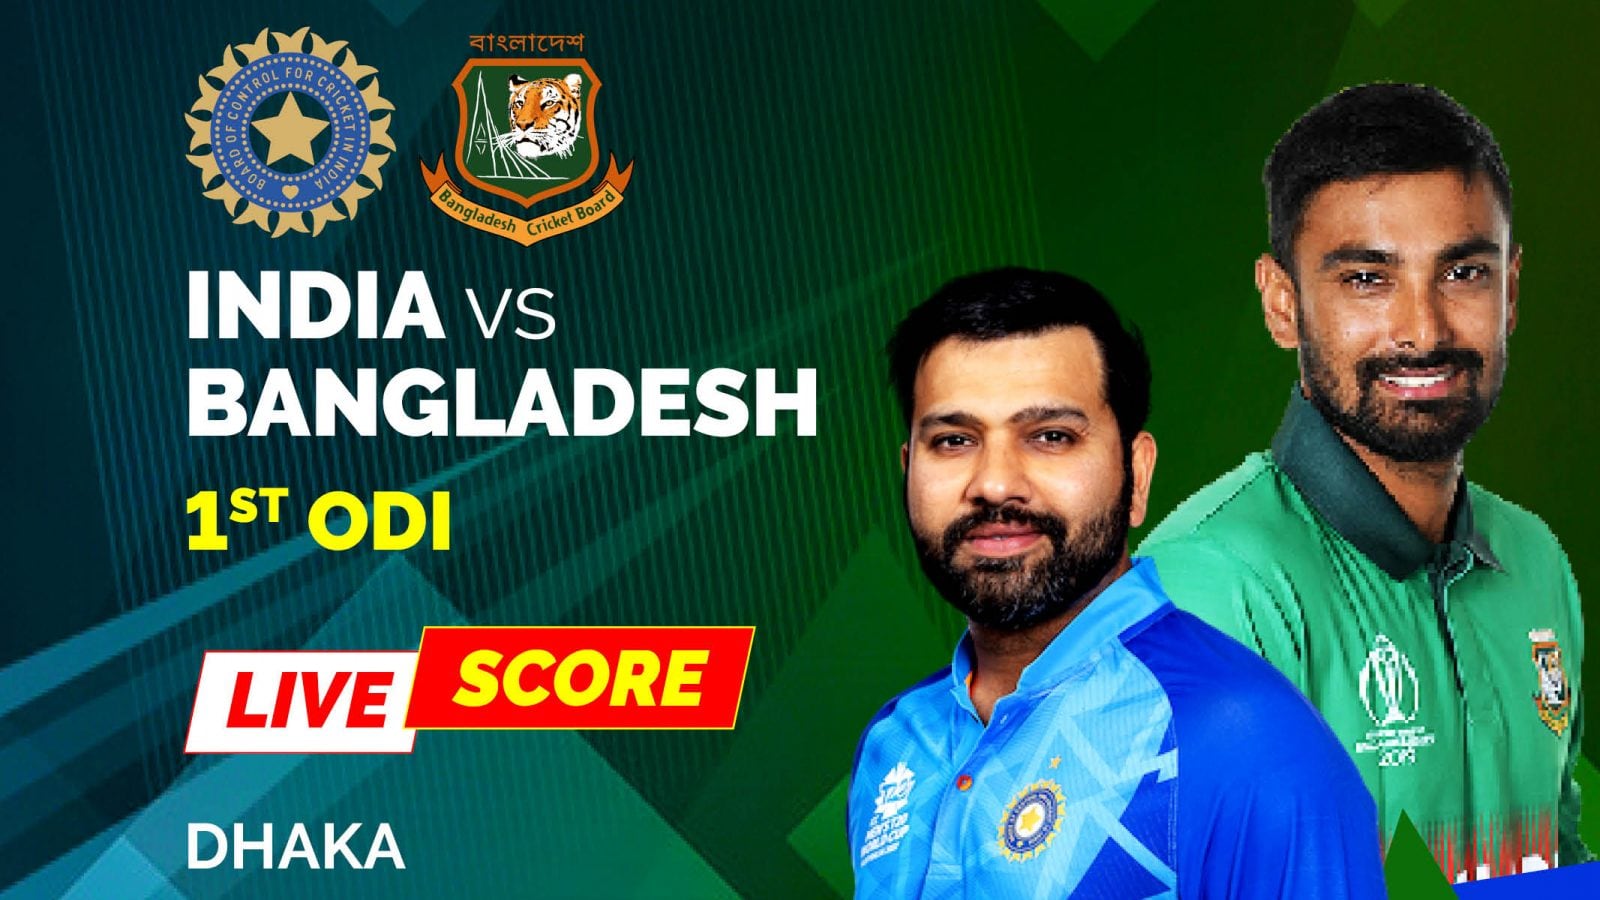 IND vs BAN Highlights 1st ODI Updates Mehidy Hasan Miraz Guides Bangladesh to Memorable 1-wicket Win Over India